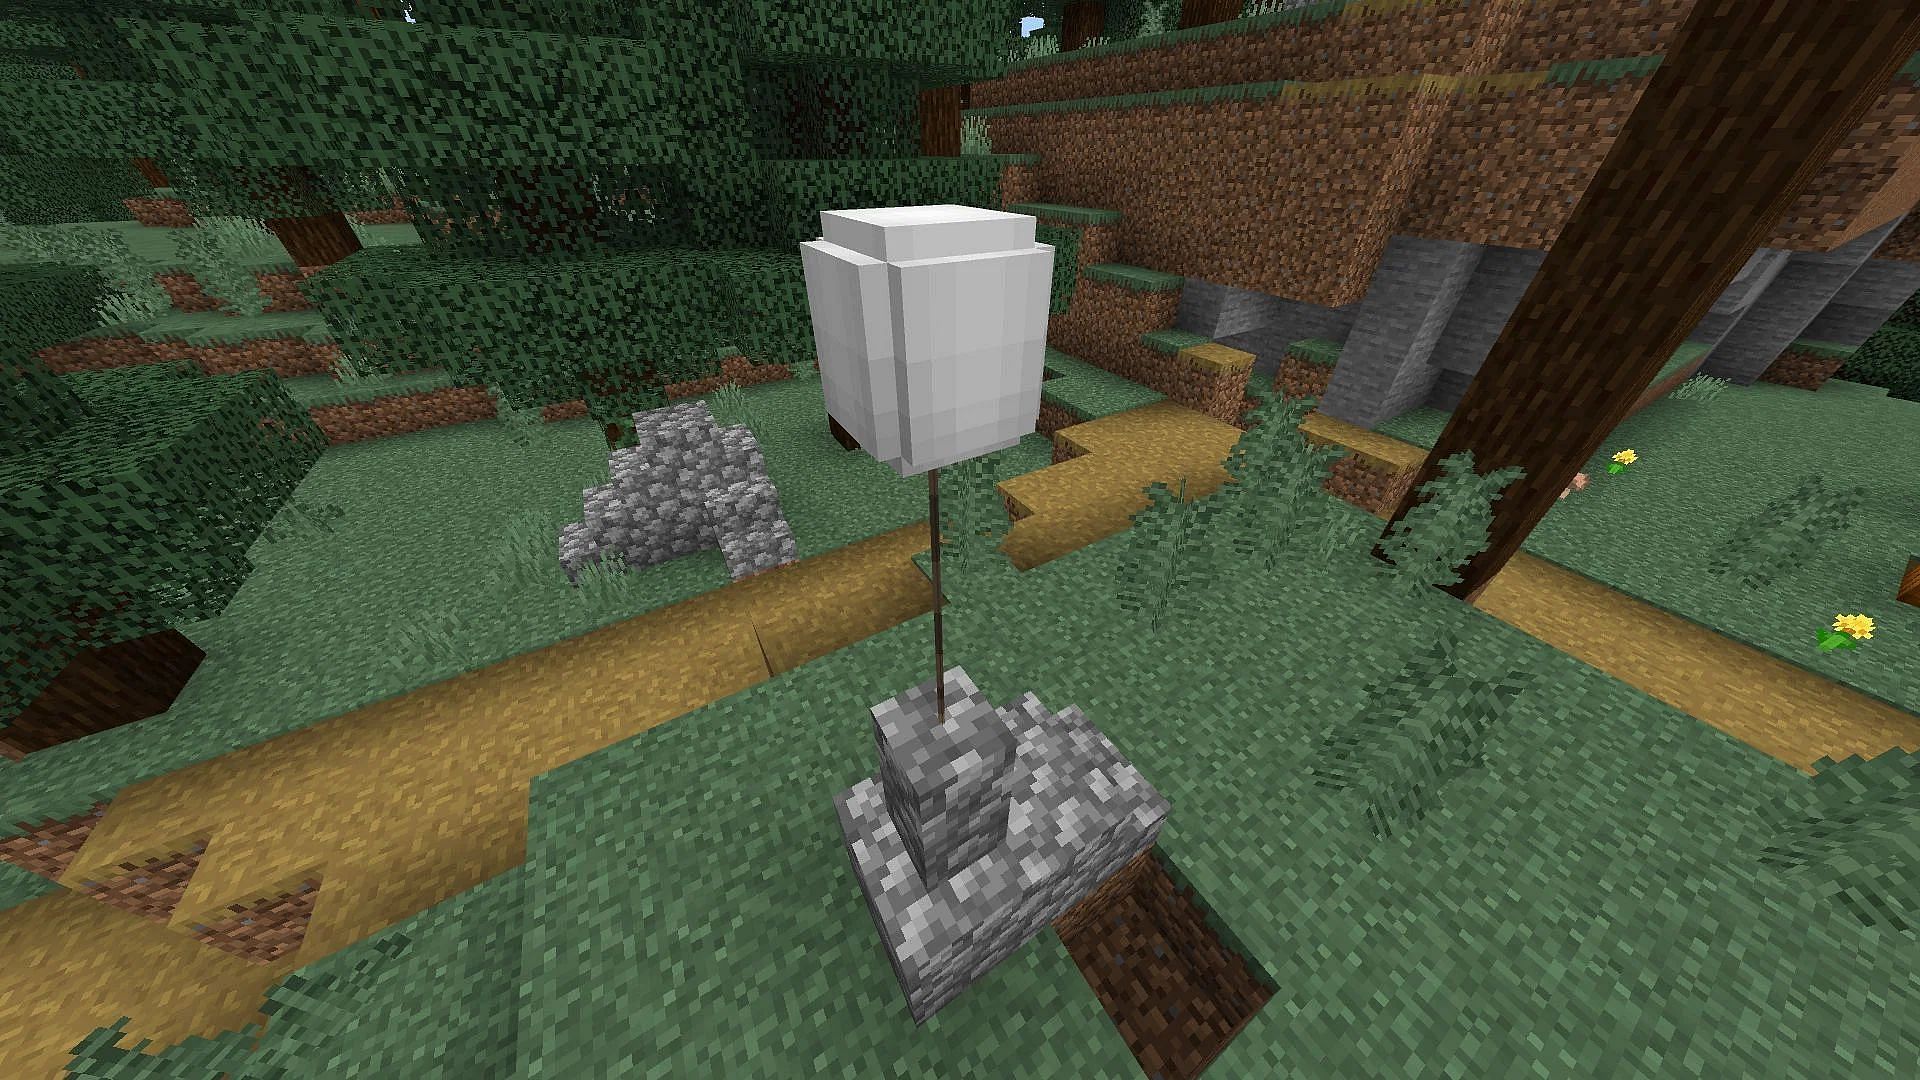 Balloon in Minecraft Education Edition is the best feature (Image via Mojang)